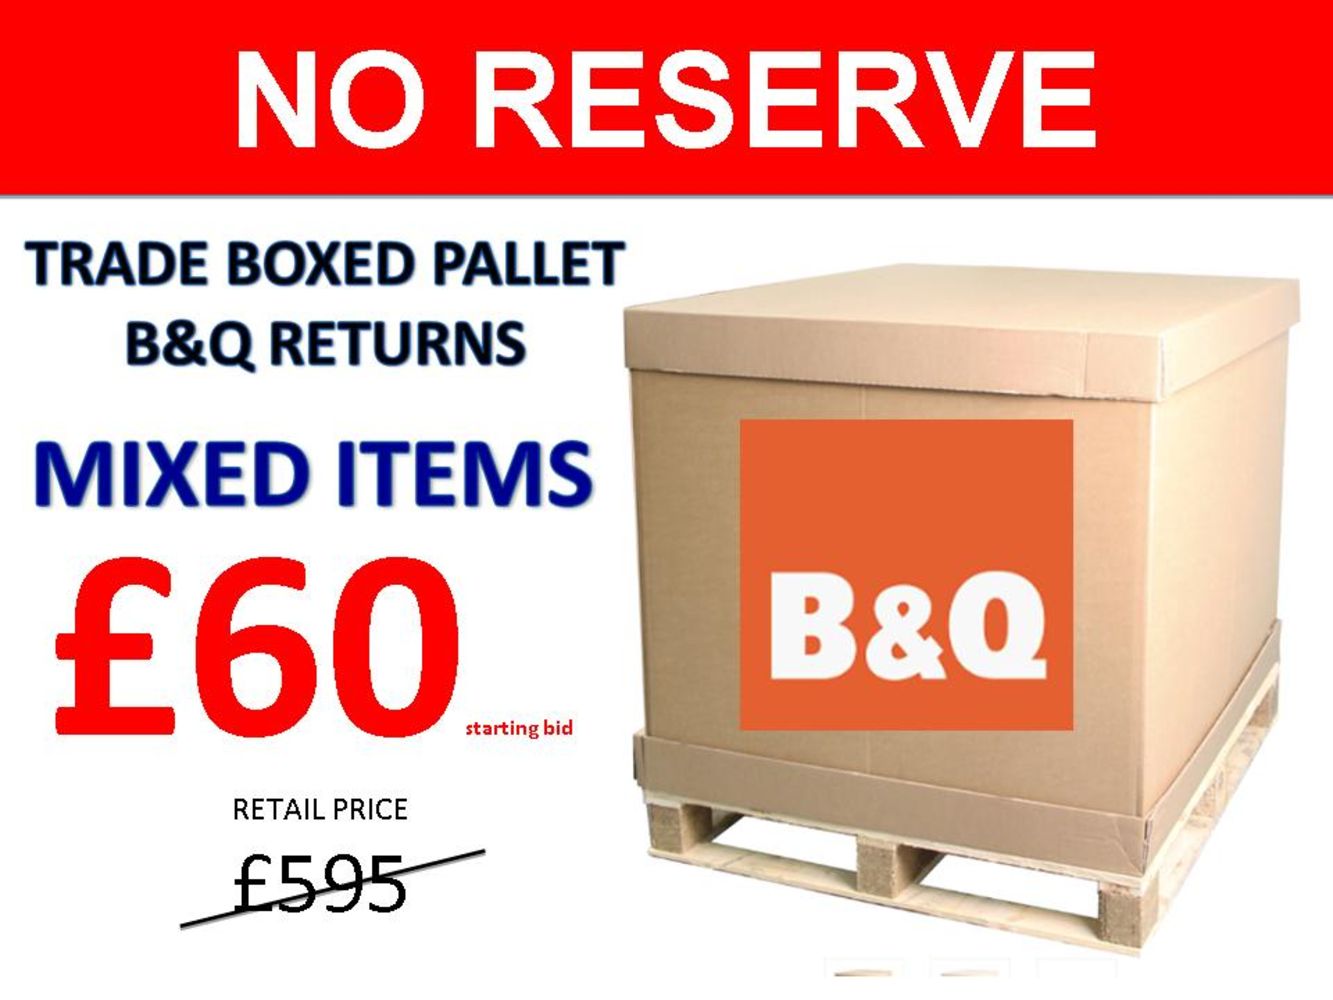 *NO RESERVE* Pallet Sale of B&Q Raw Returns - Starting Bids at 10% of Retail Value - Opportunity for Huge Savings